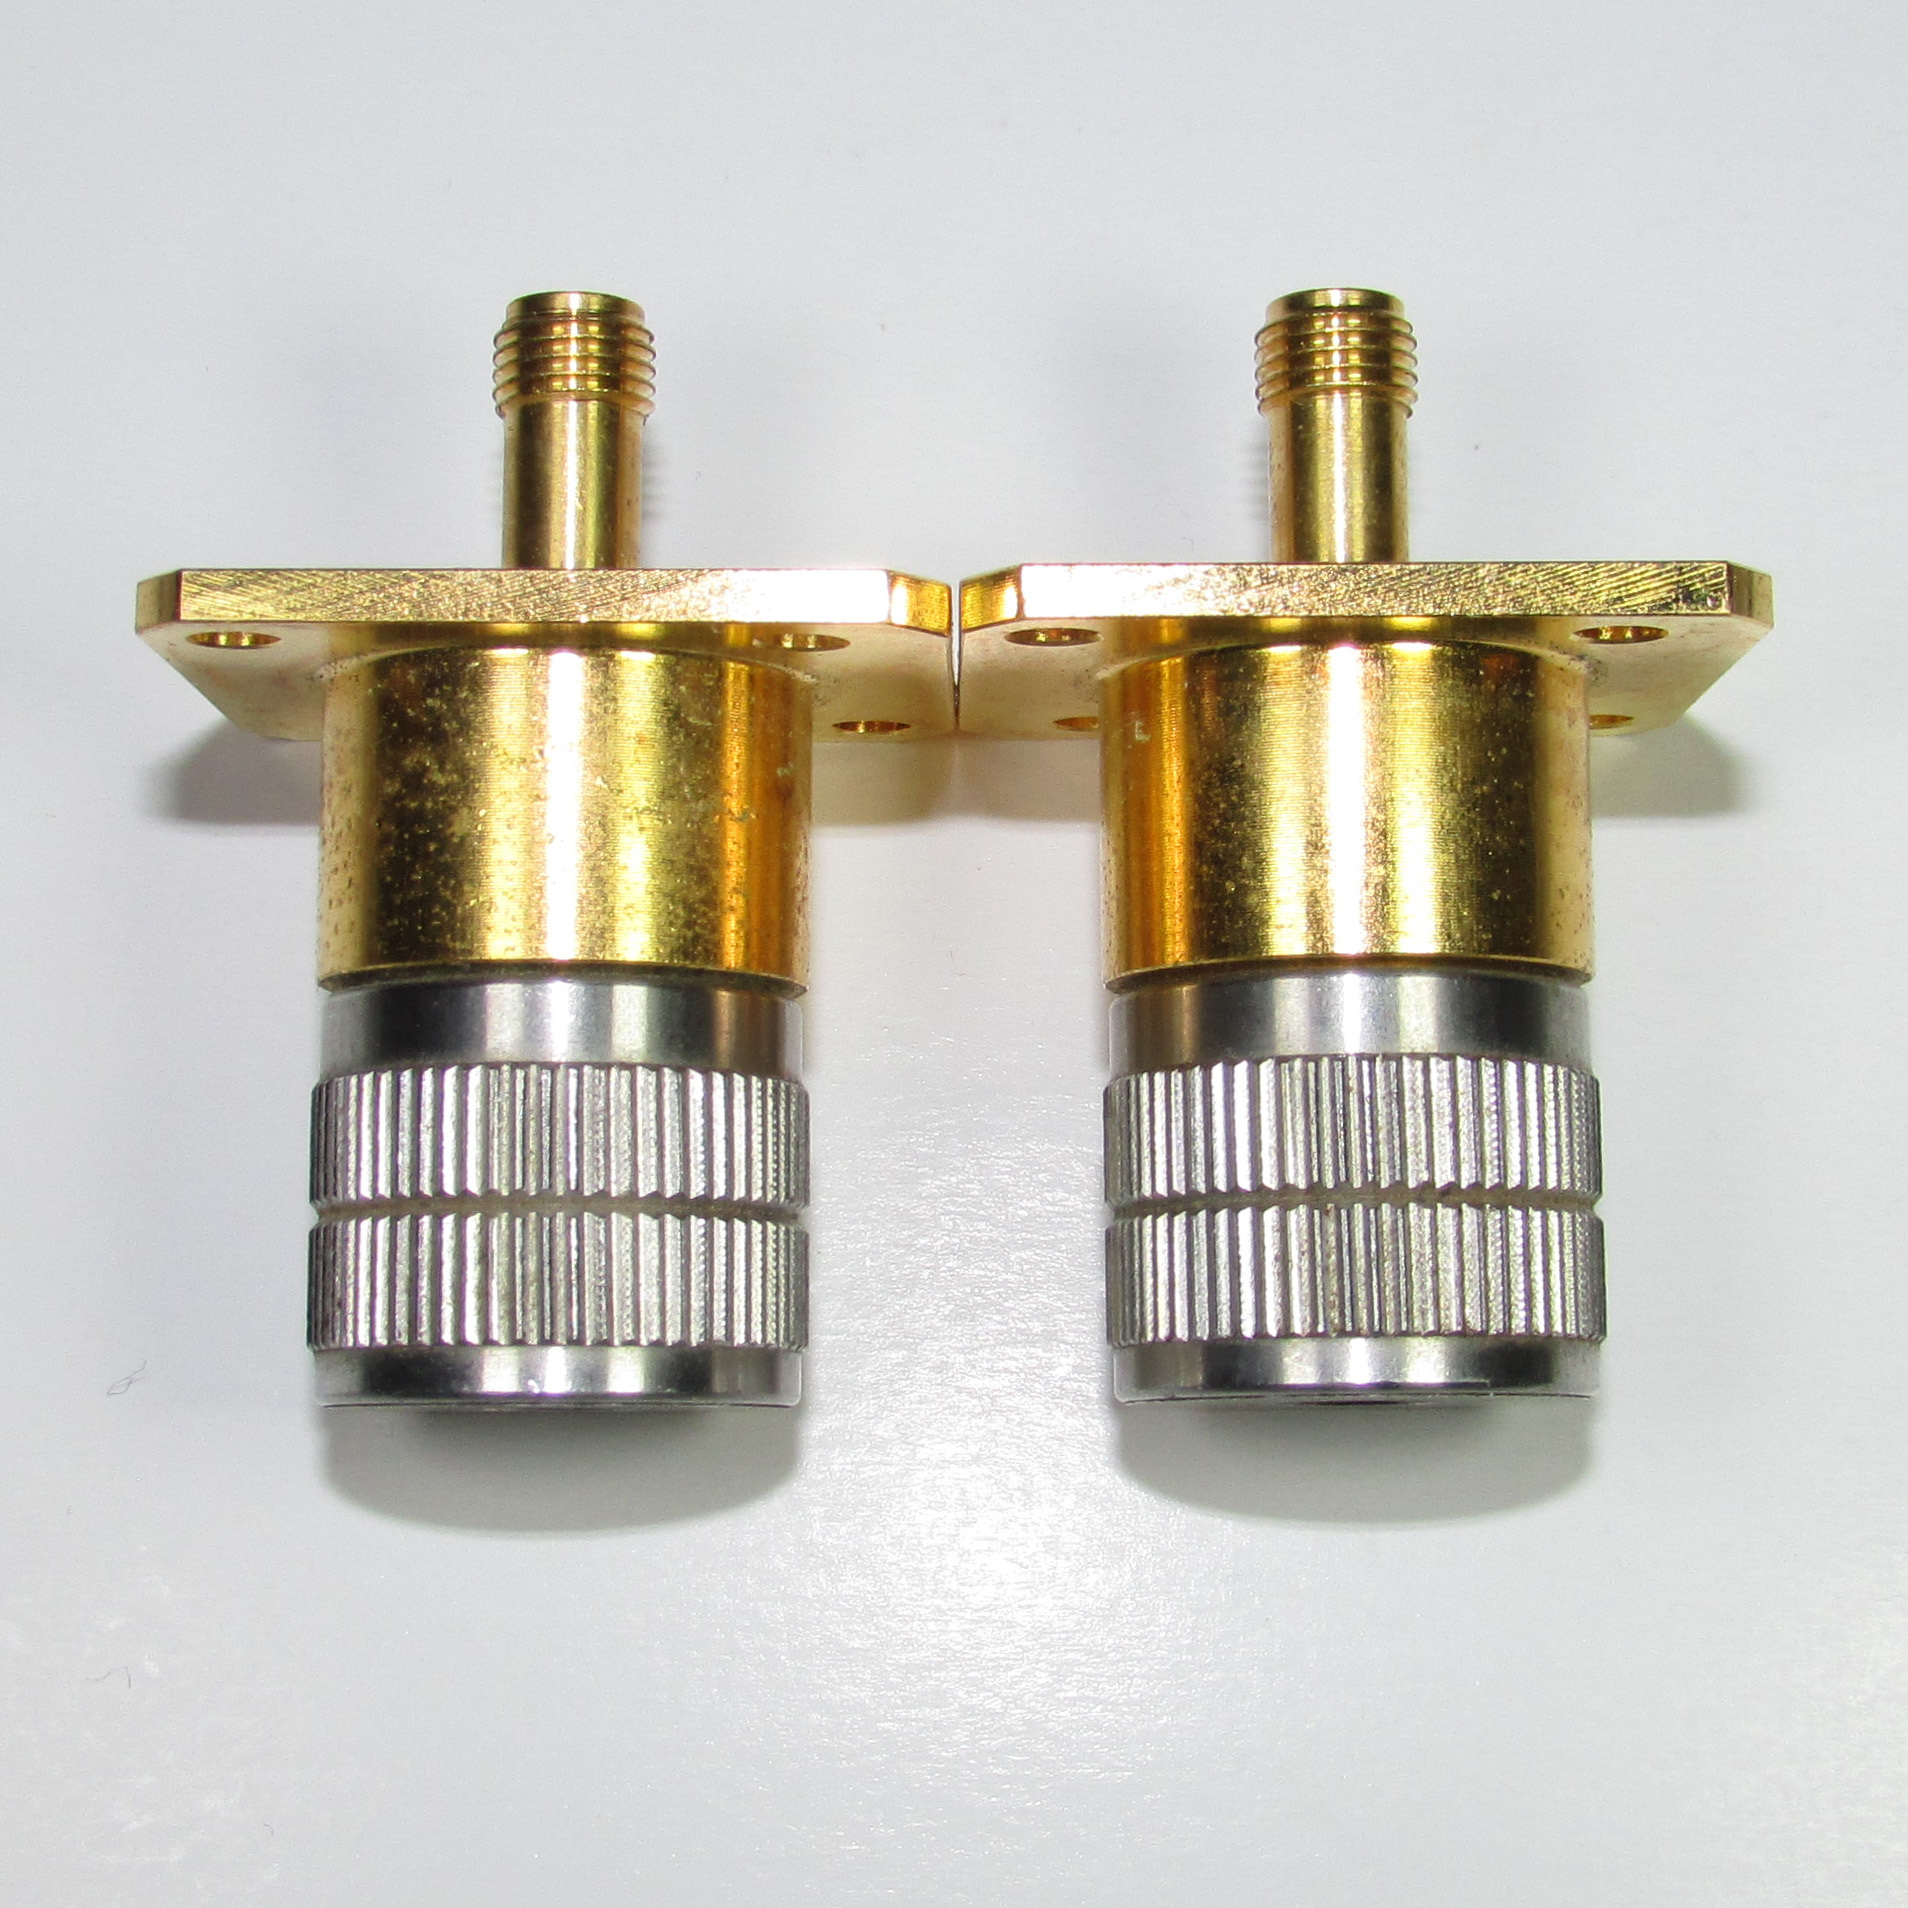 Imported disassembly 33GHz 3.5mm female / 3.5mm male precision with flange converter